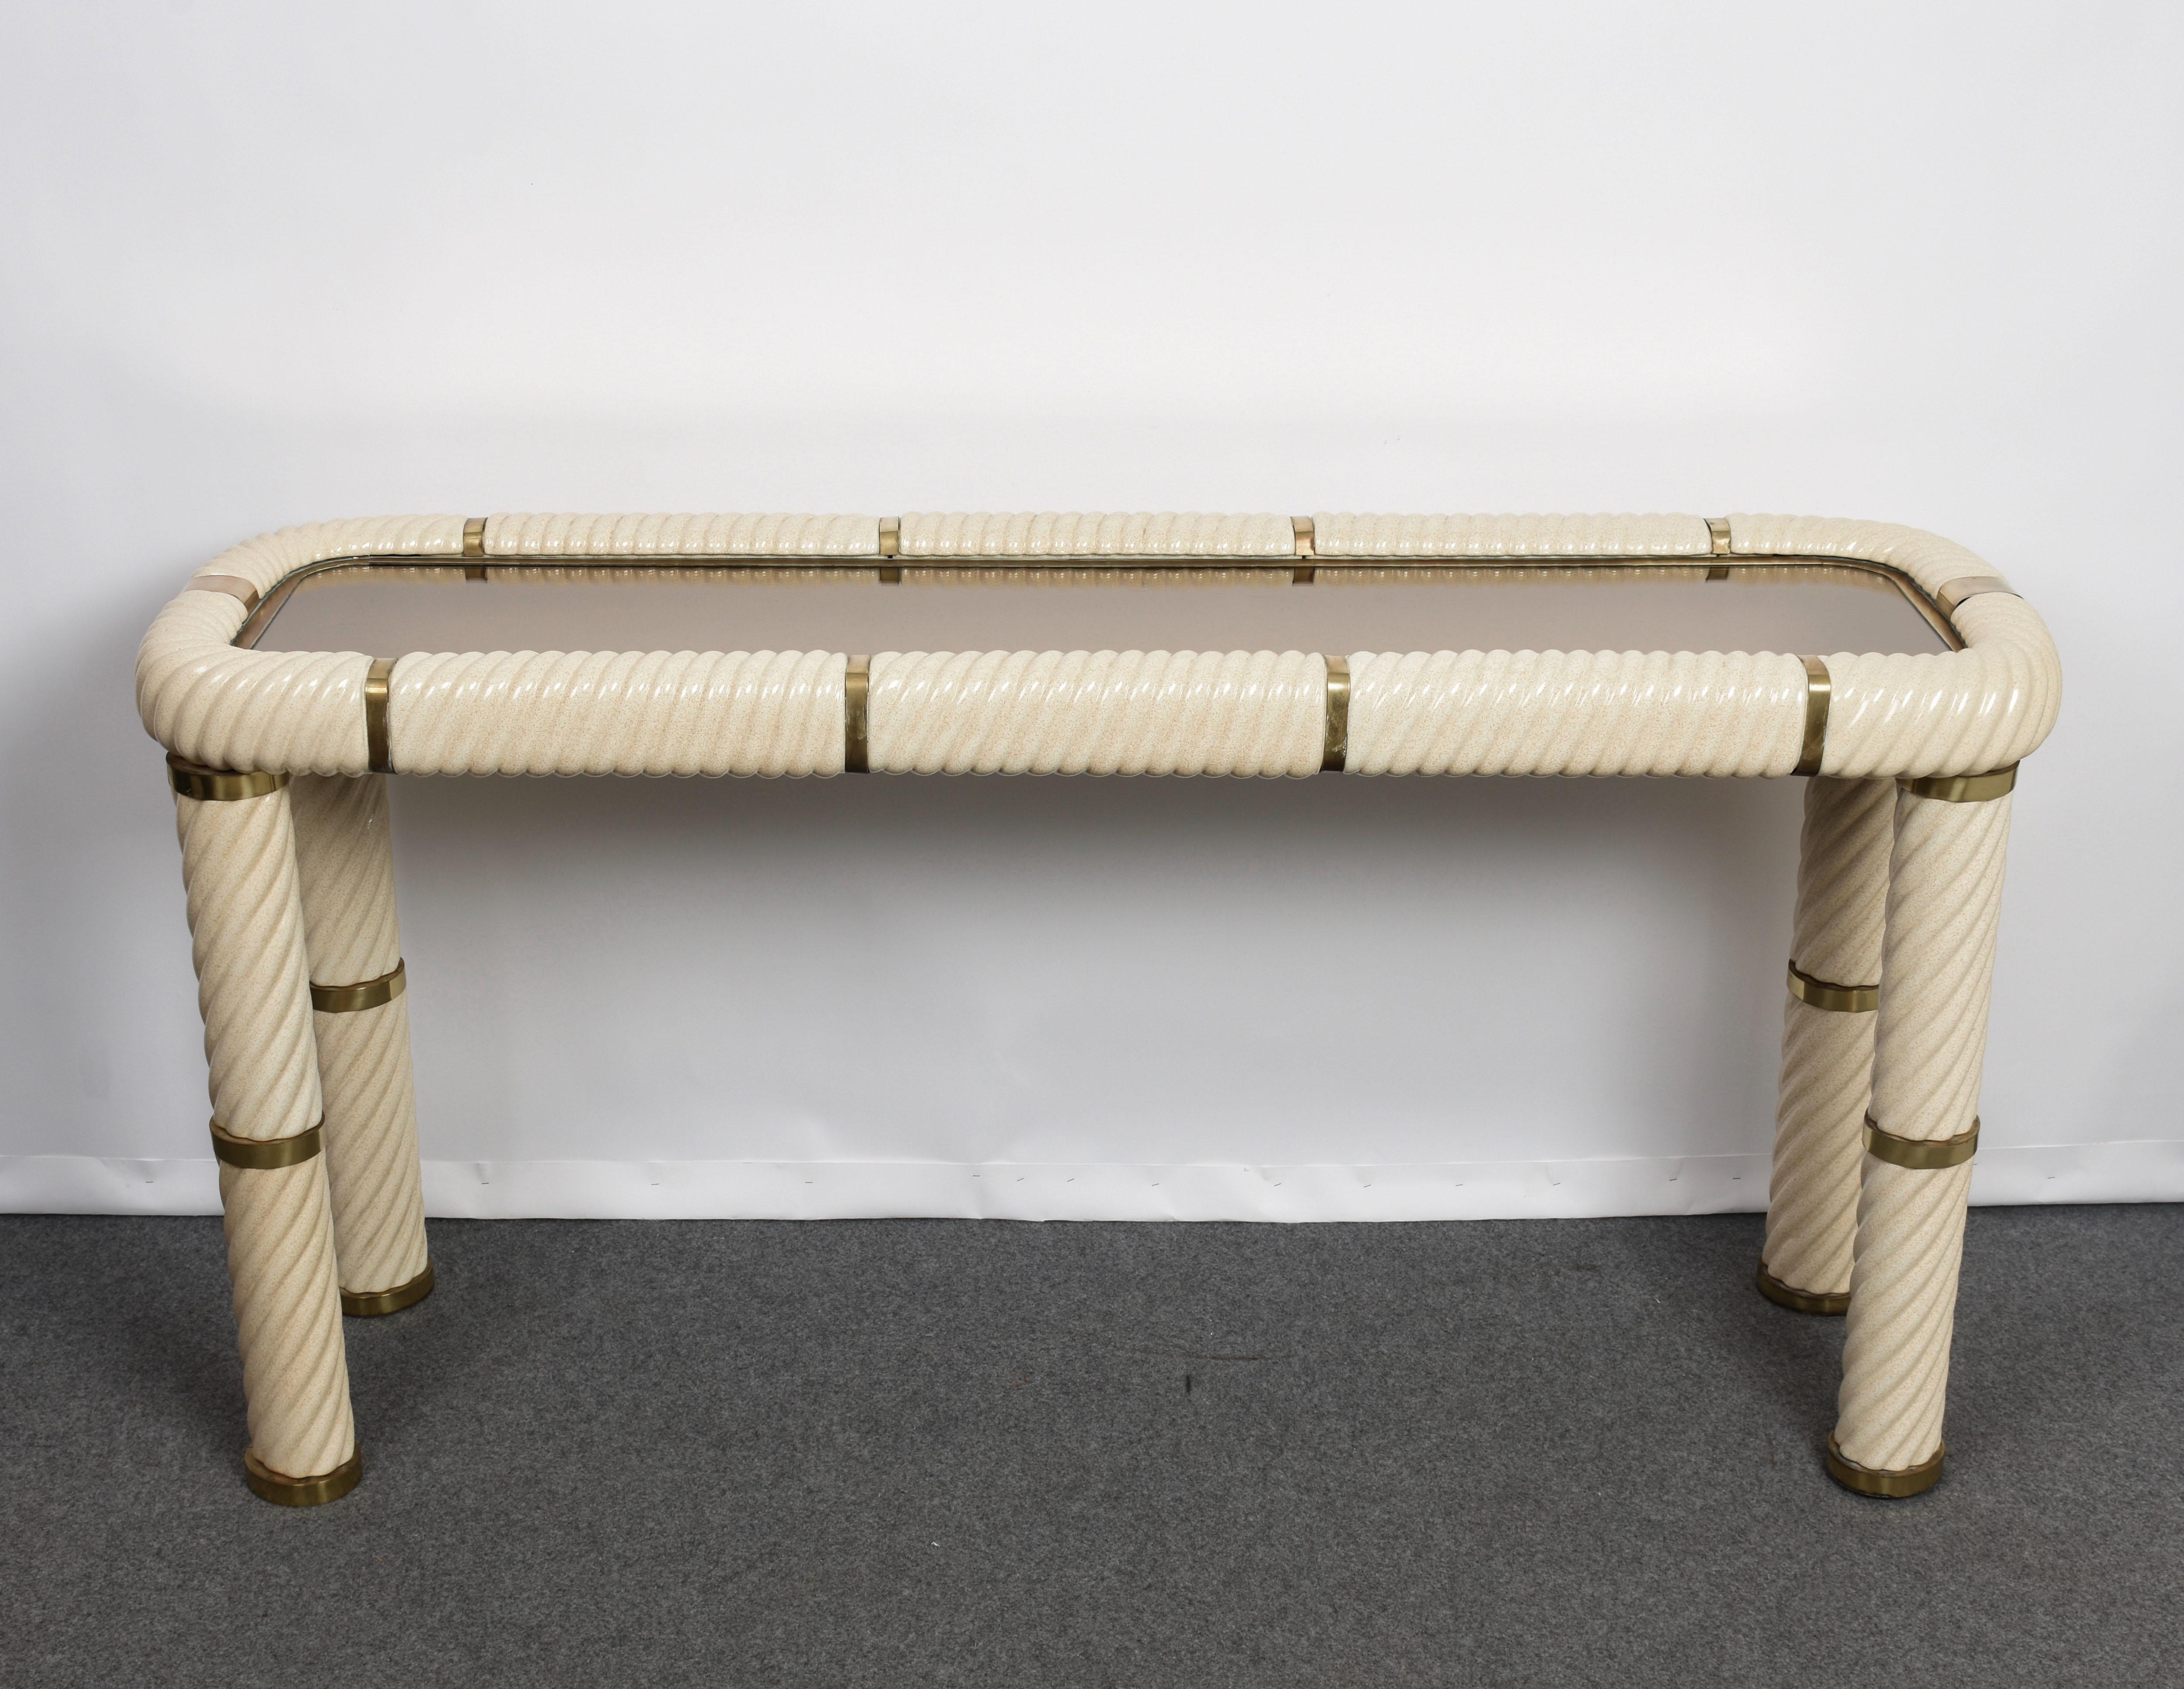 Hollywood Regency Tommaso Barbi Ceramic Brass and Mirrored Glass Italian Console Table, 1970s